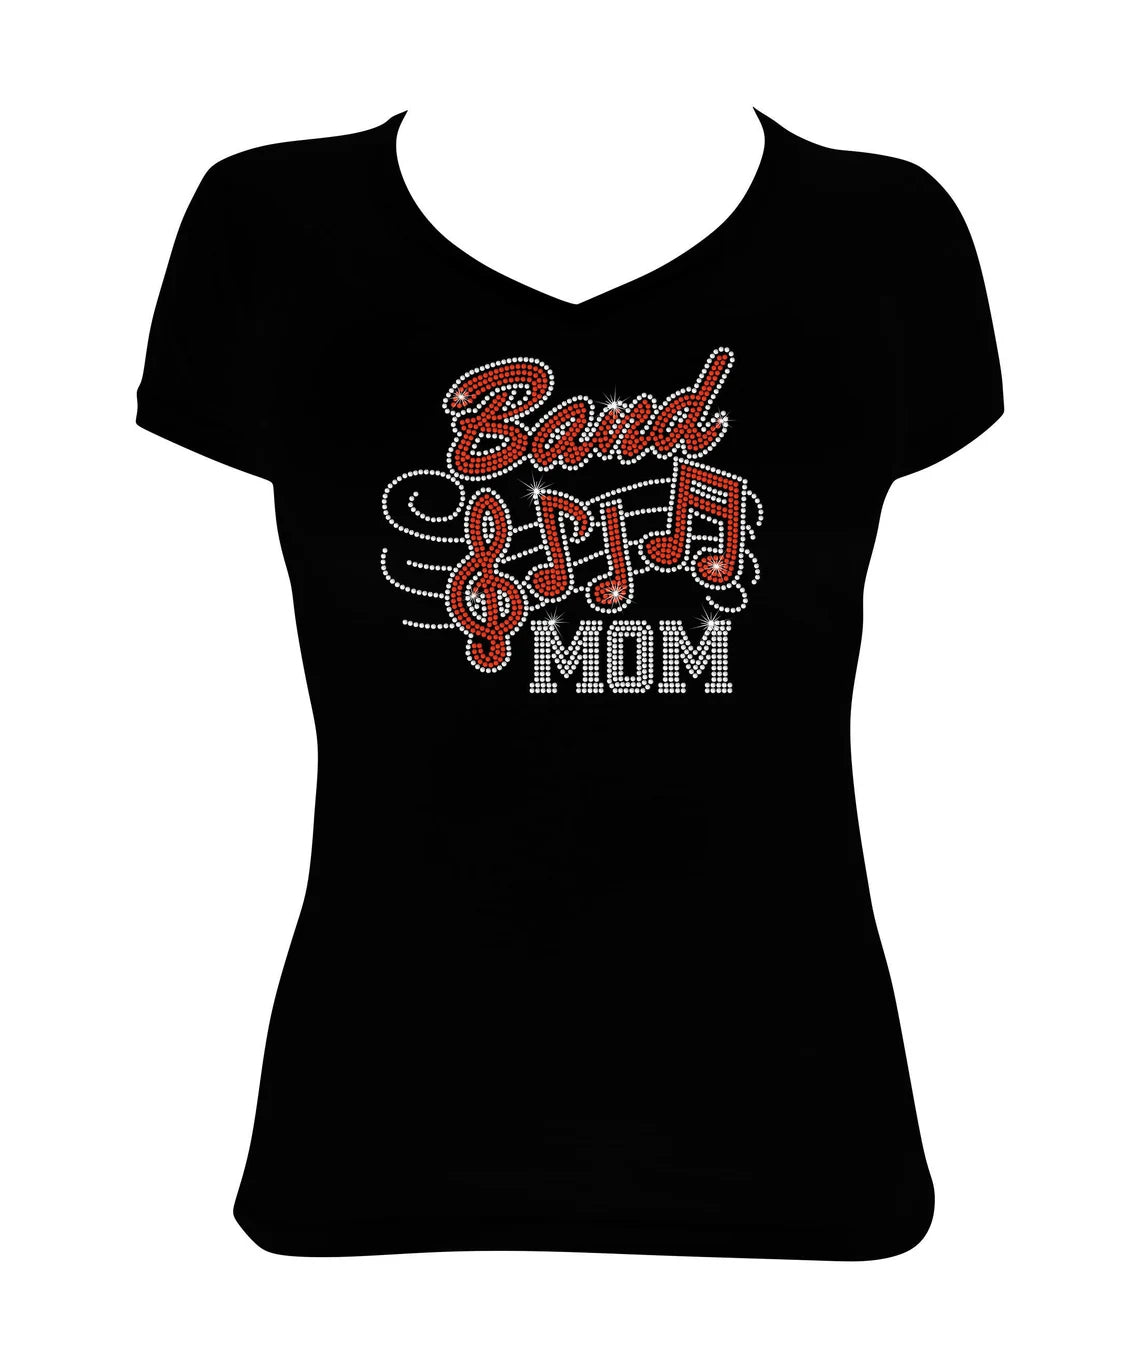 Women's Rhinestone Fitted Tight Snug Band Mom & Music Notes - Band Shirt